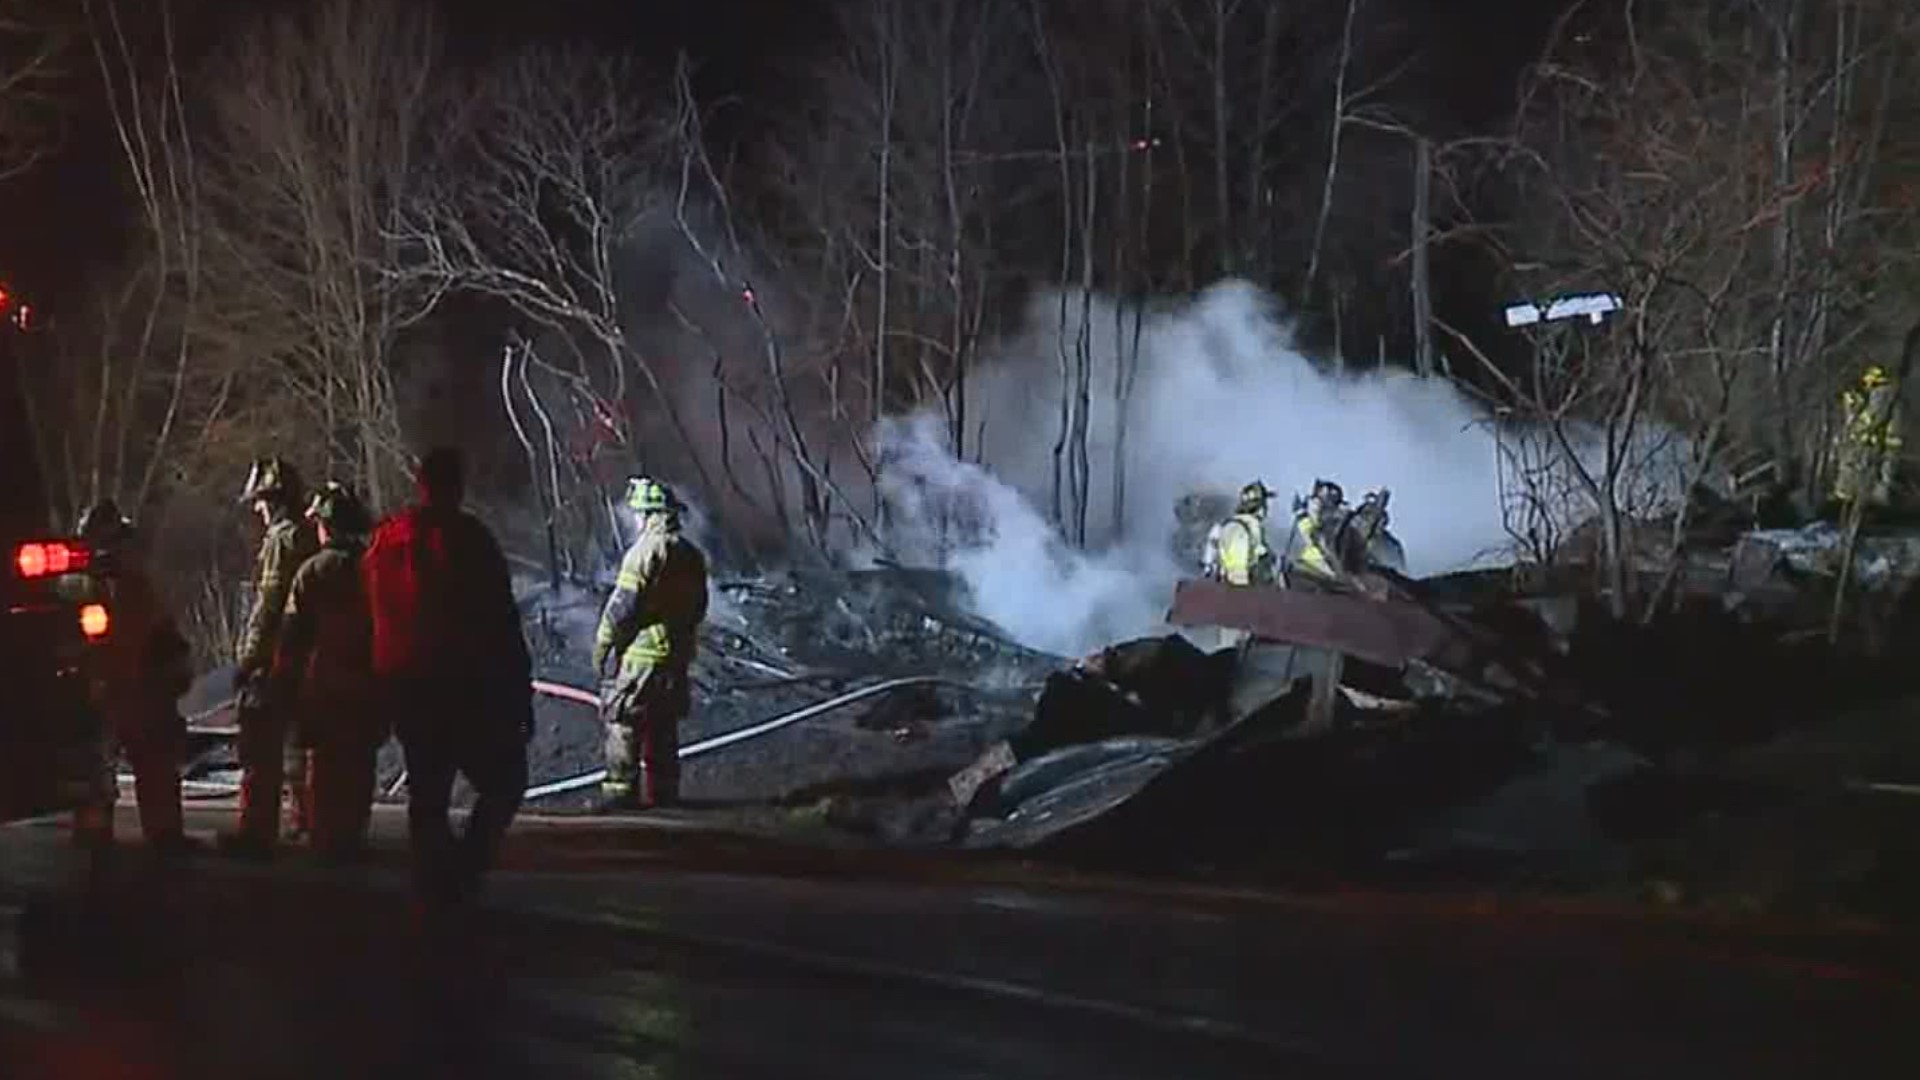 A fire destroyed a barn early Wednesday morning in Susquehanna County.